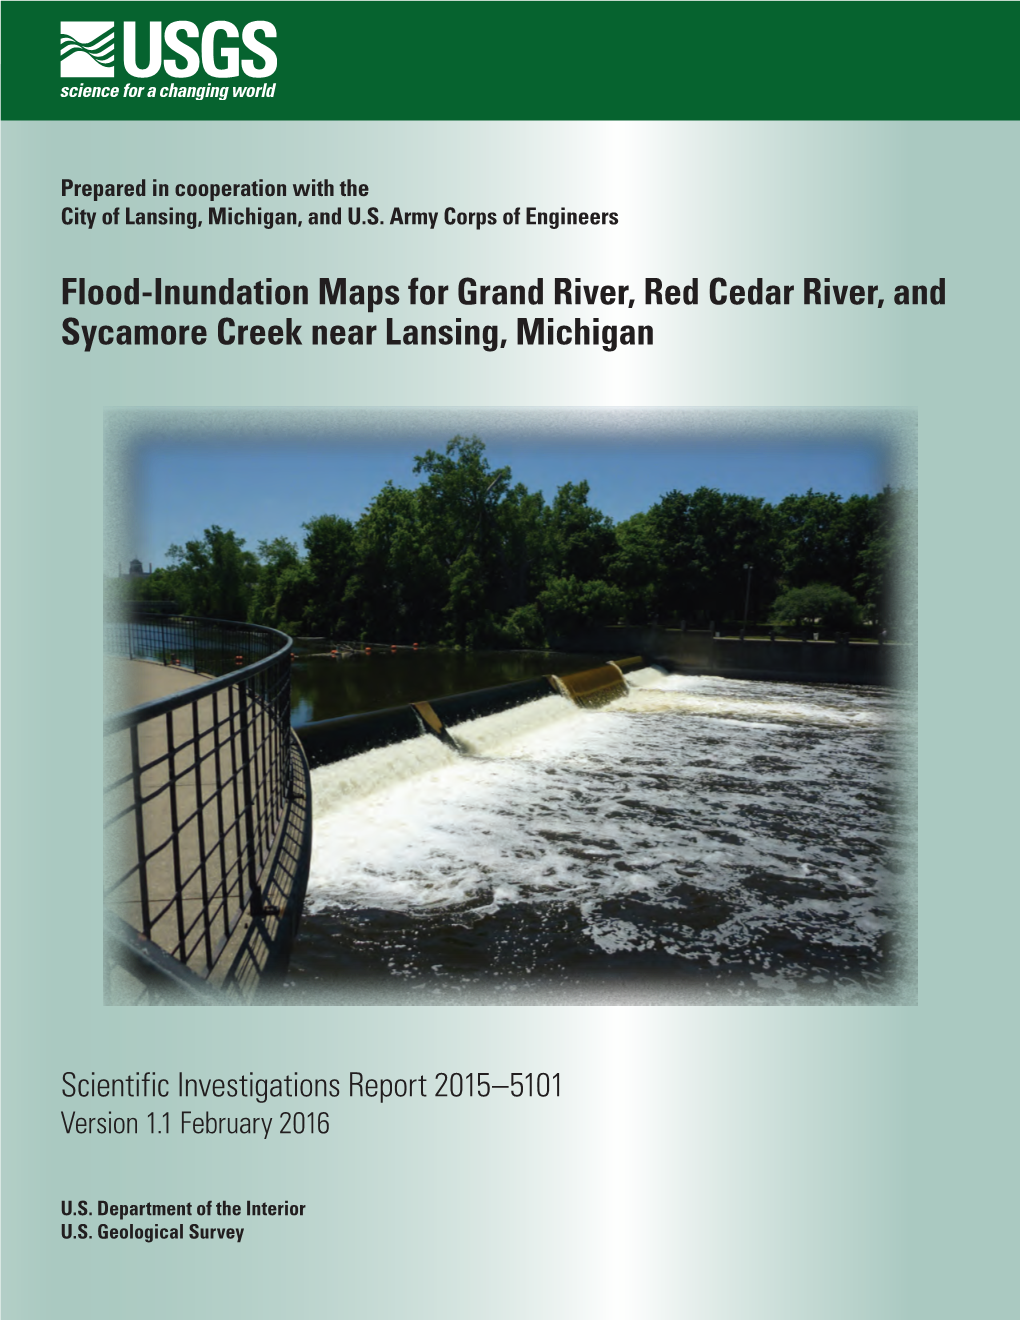 Flood-Inundation Maps for Grand River, Red Cedar River, and Sycamore Creek Near Lansing, Michigan